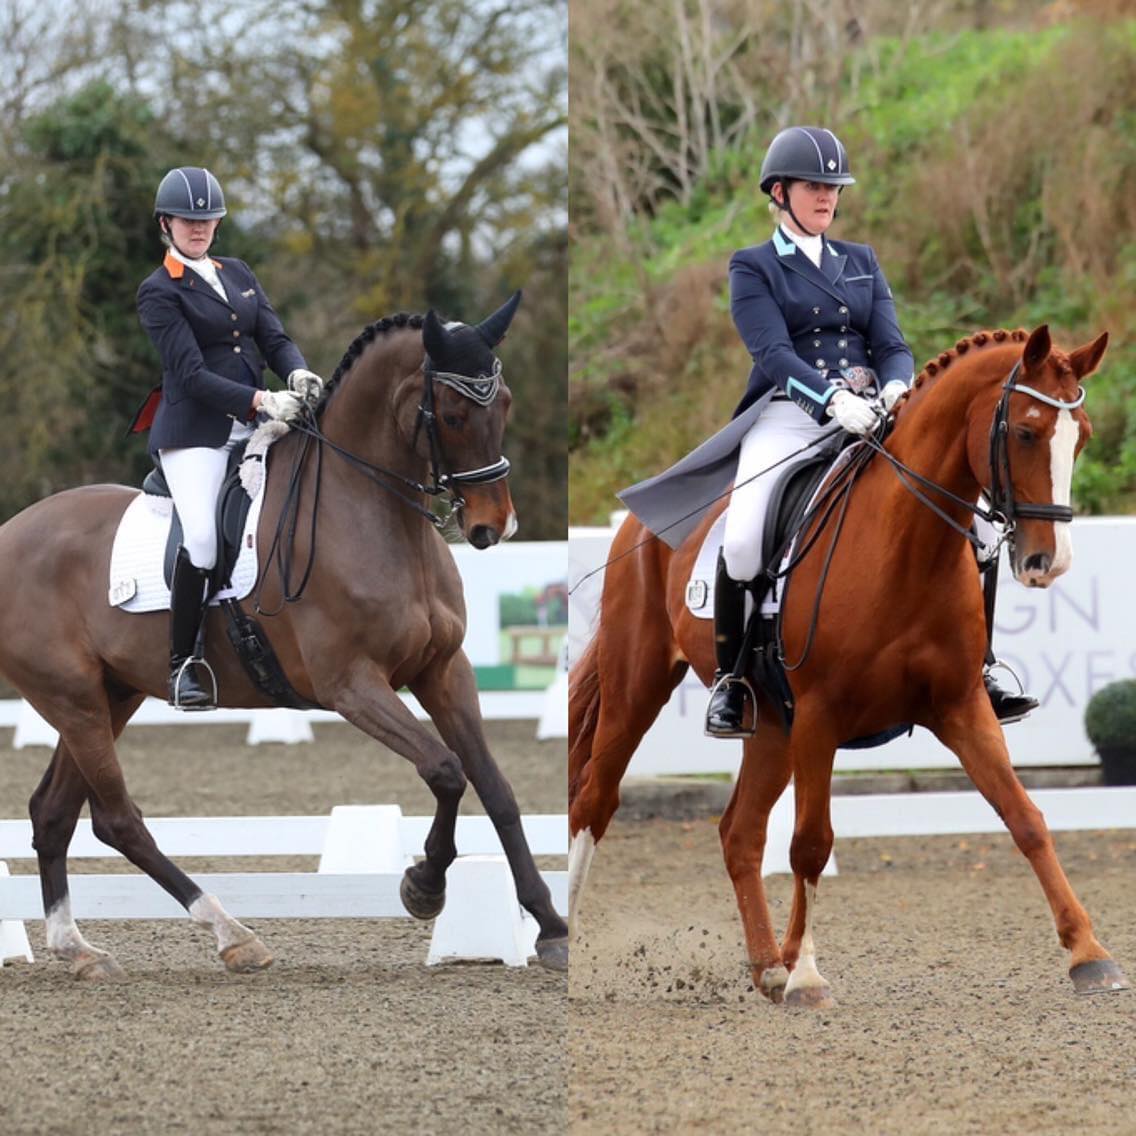 Katy Applin signs both of her dancing dressage horses up on subscription.